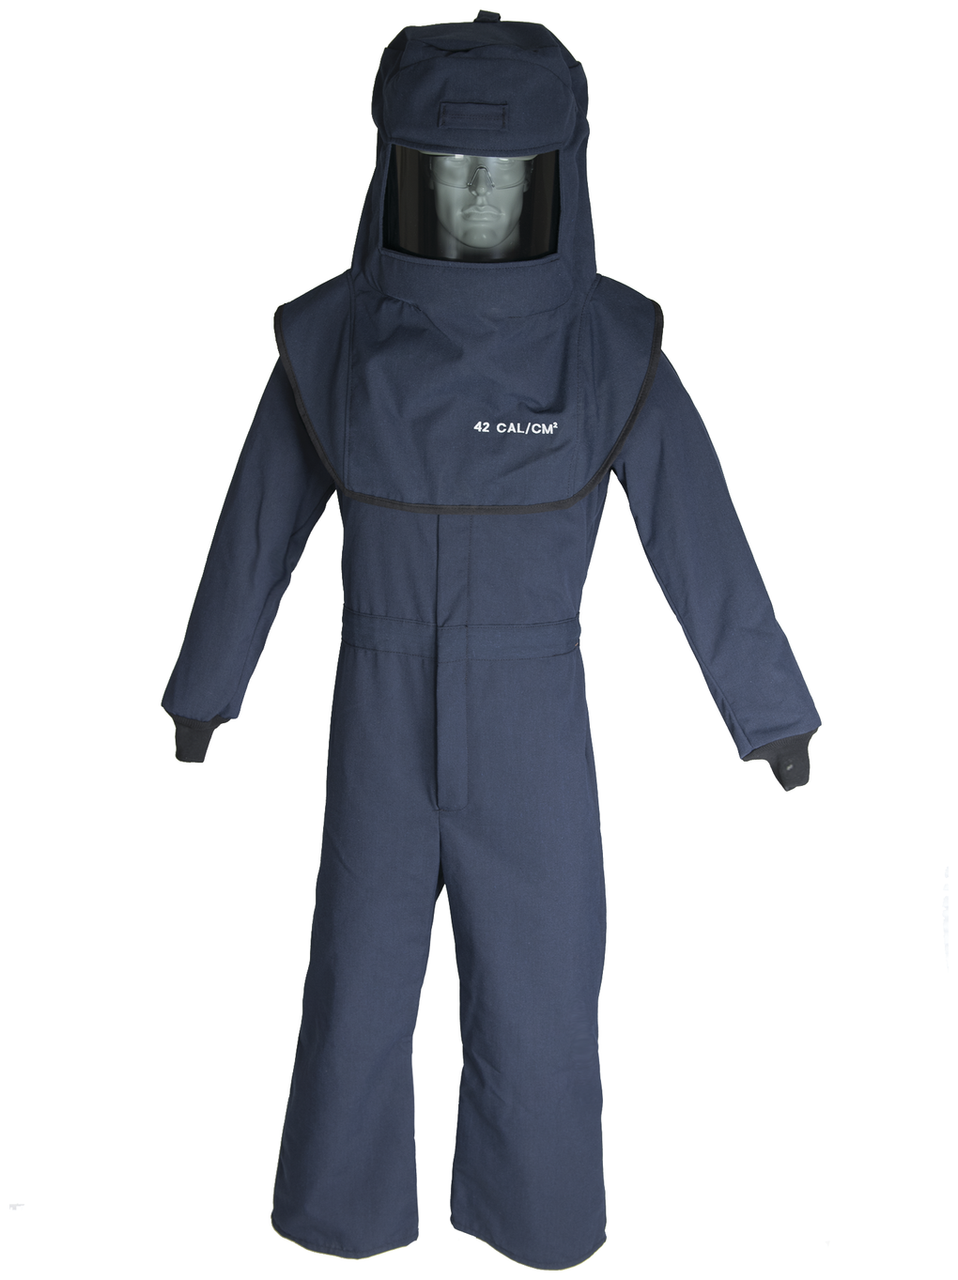 Arc Flash Hood And Coverall Suit Set Large Zing Safety